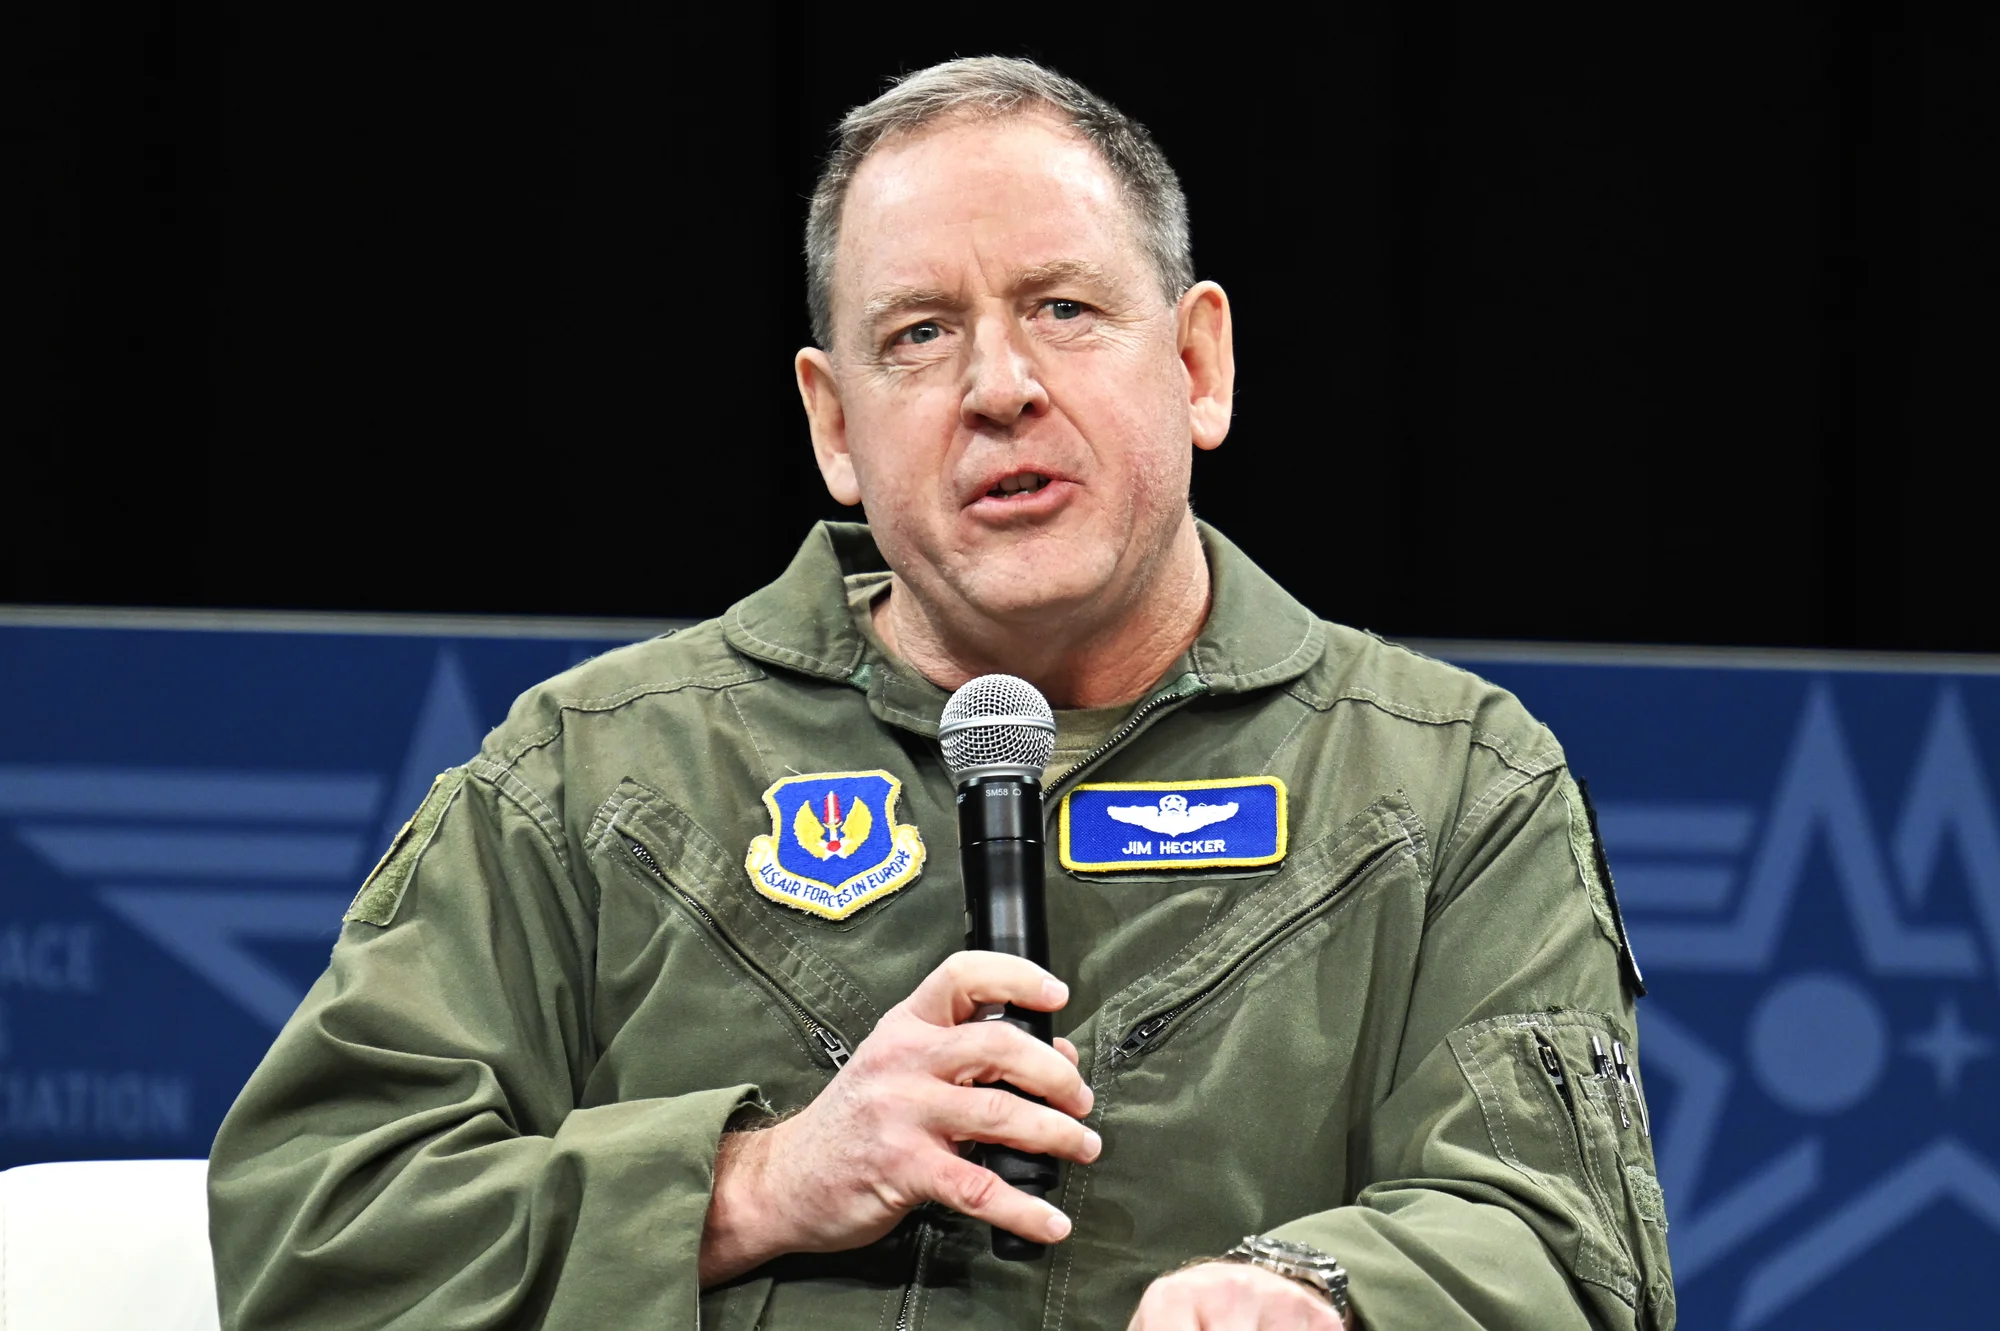 U.S. Air Force, Gen. James Hecker, commander of U.S. Air Forces in Europe, speaks at the Air and Space Forces Association 